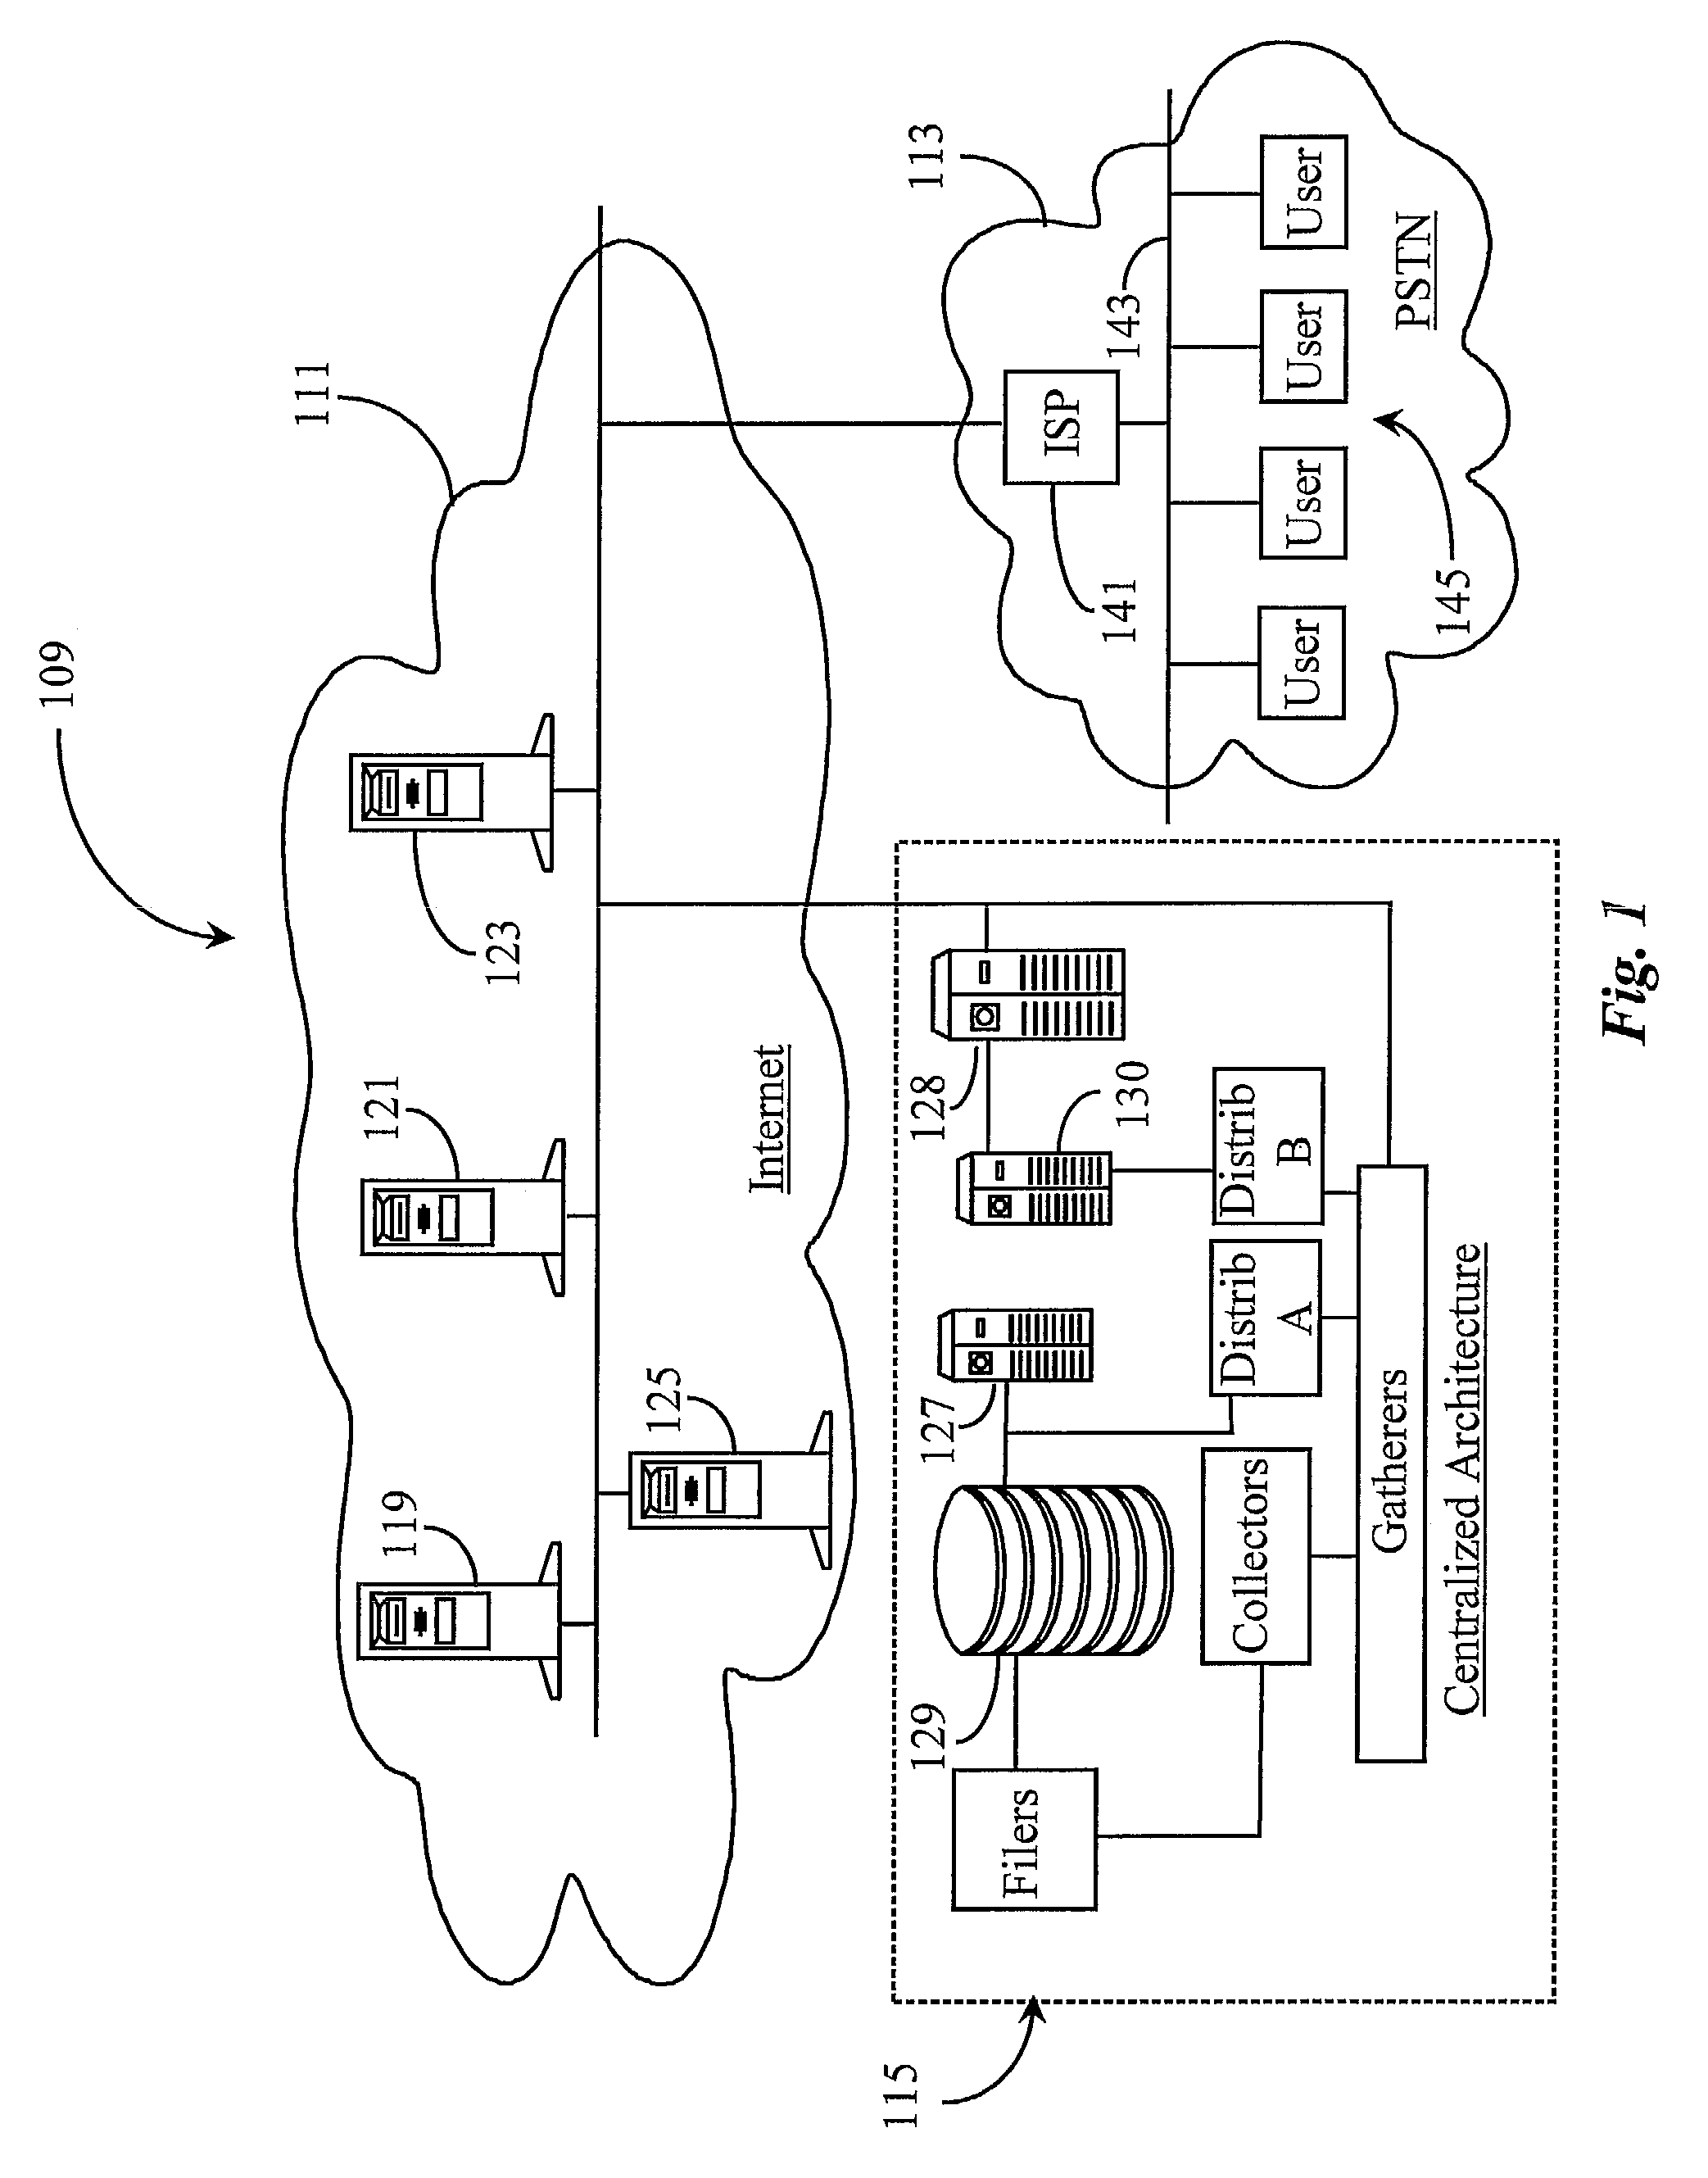 Method and system for increasing client participation in a network-based bill pay service